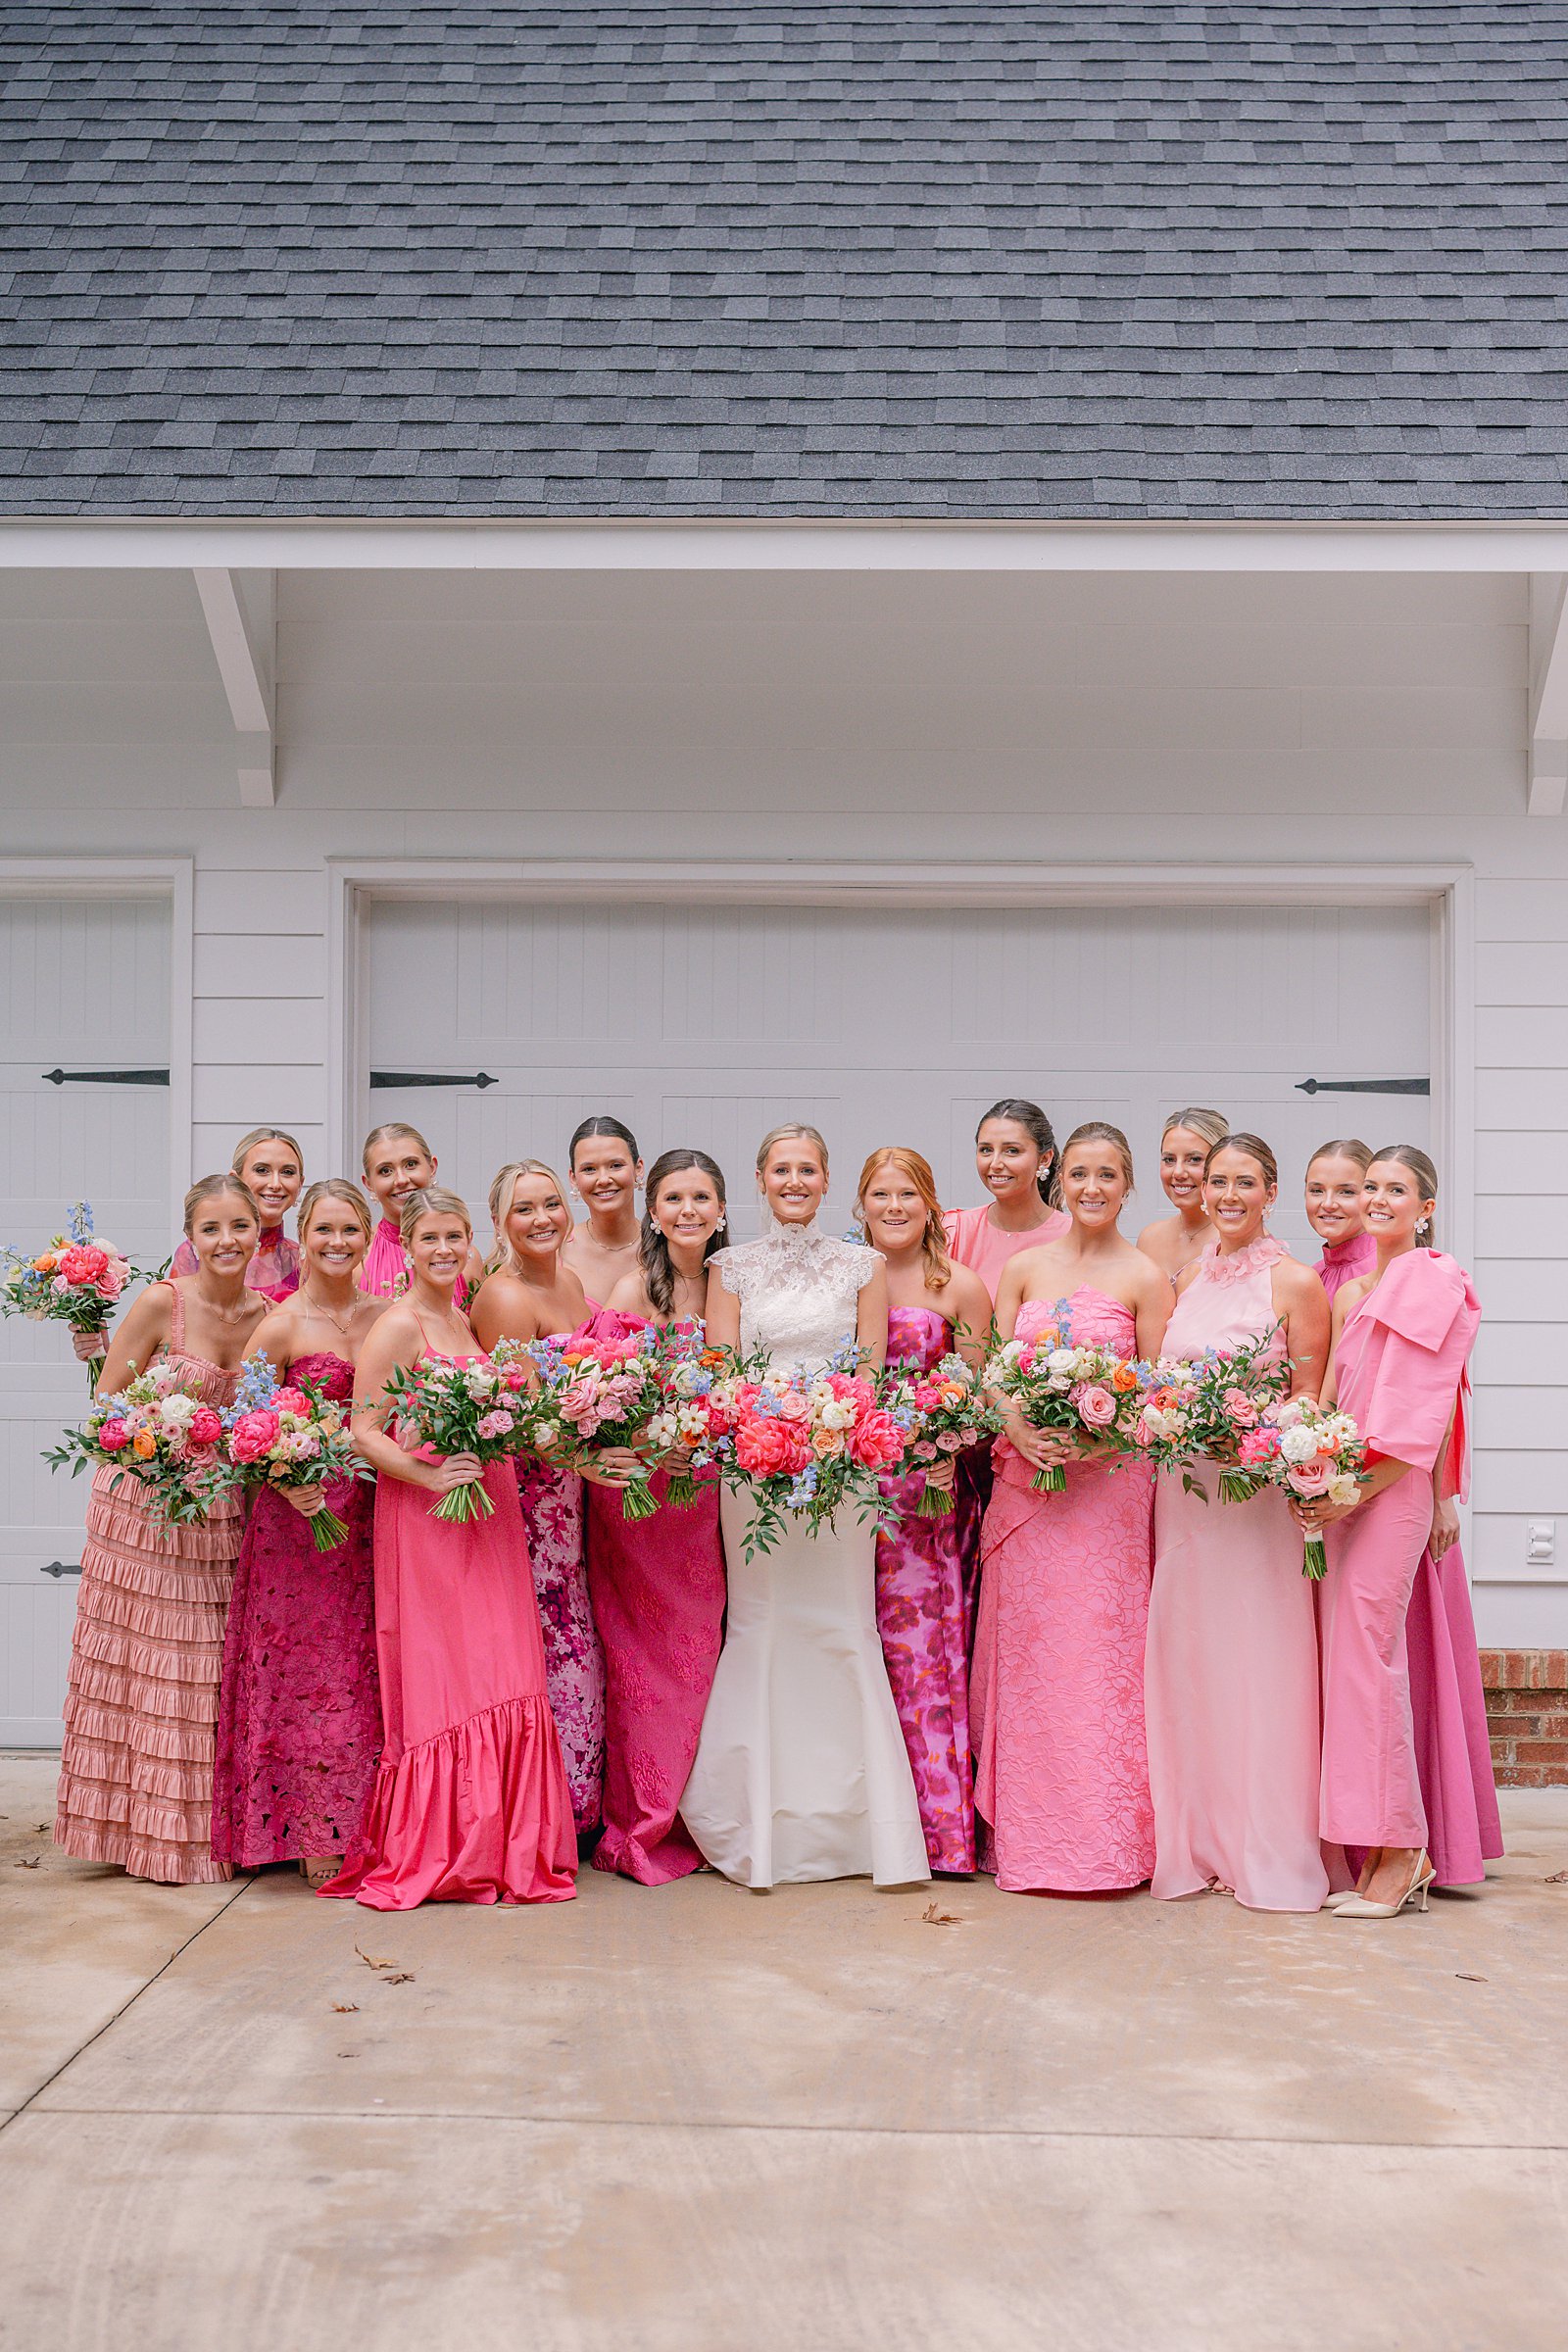 Albany, Ga Wedding at Double Gate Country Club - all pink bridesmaids dresses